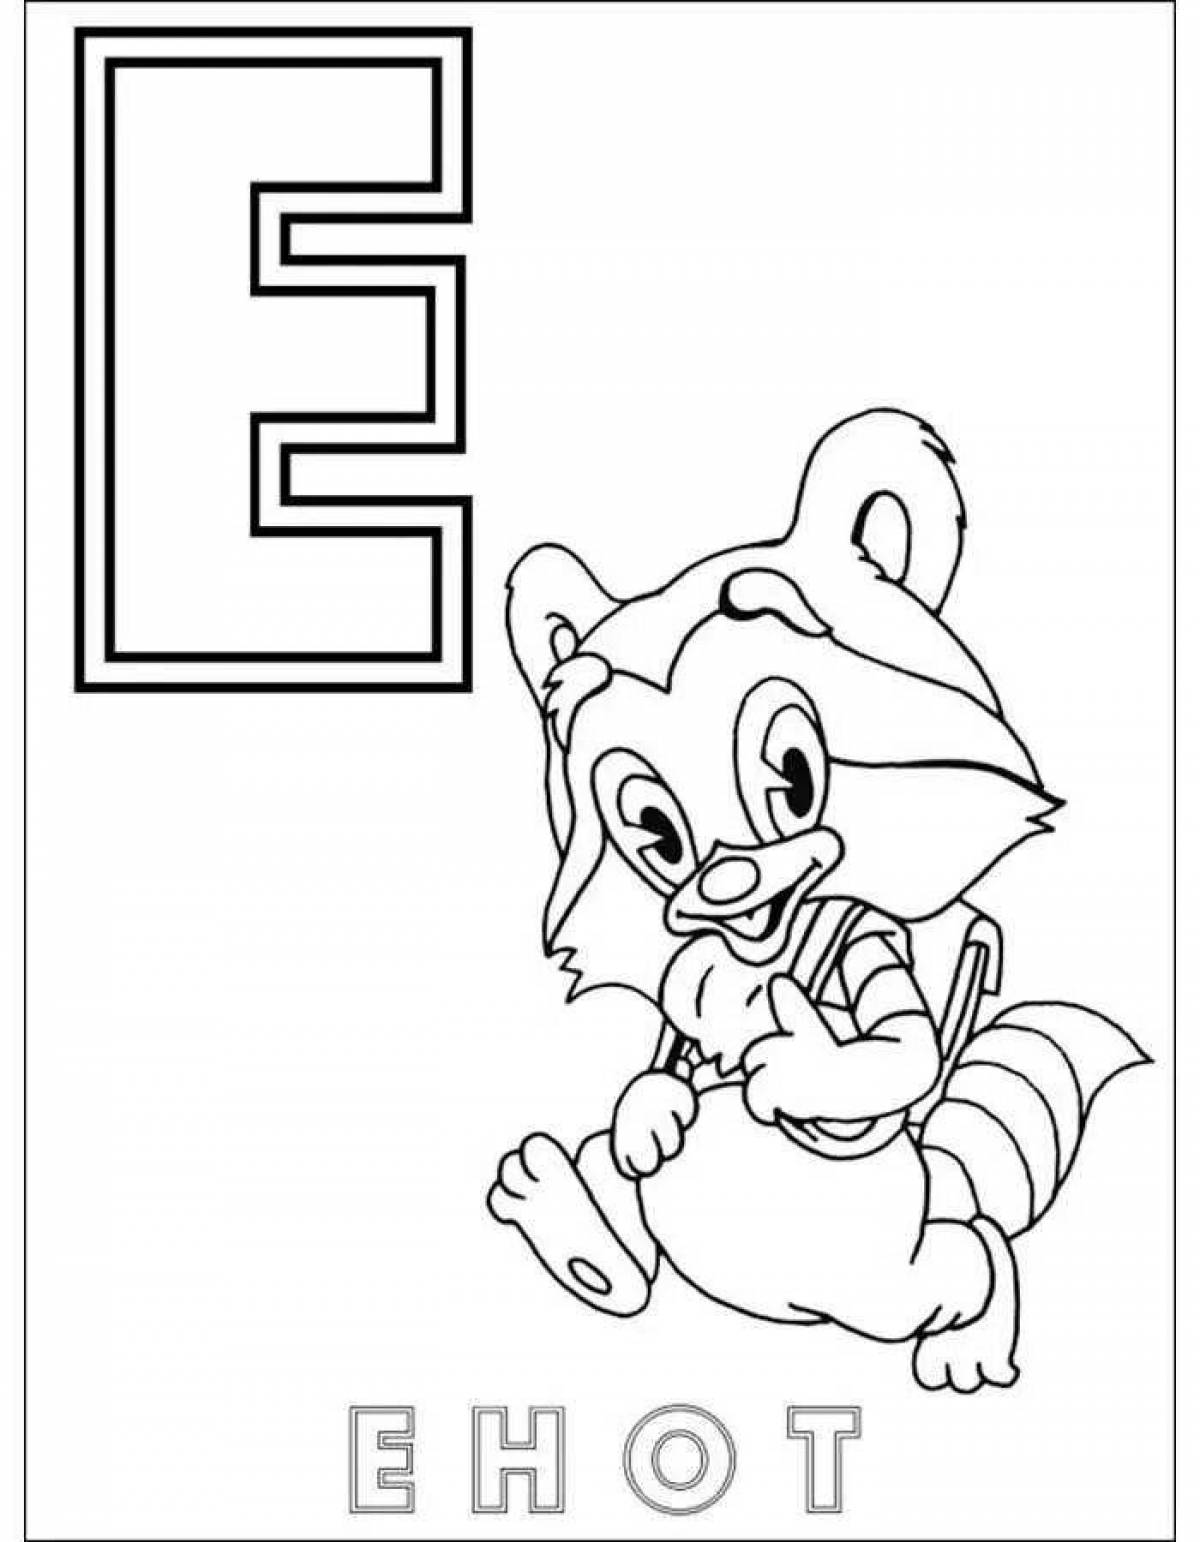 Creative coloring of the letters of the alphabet for the little ones